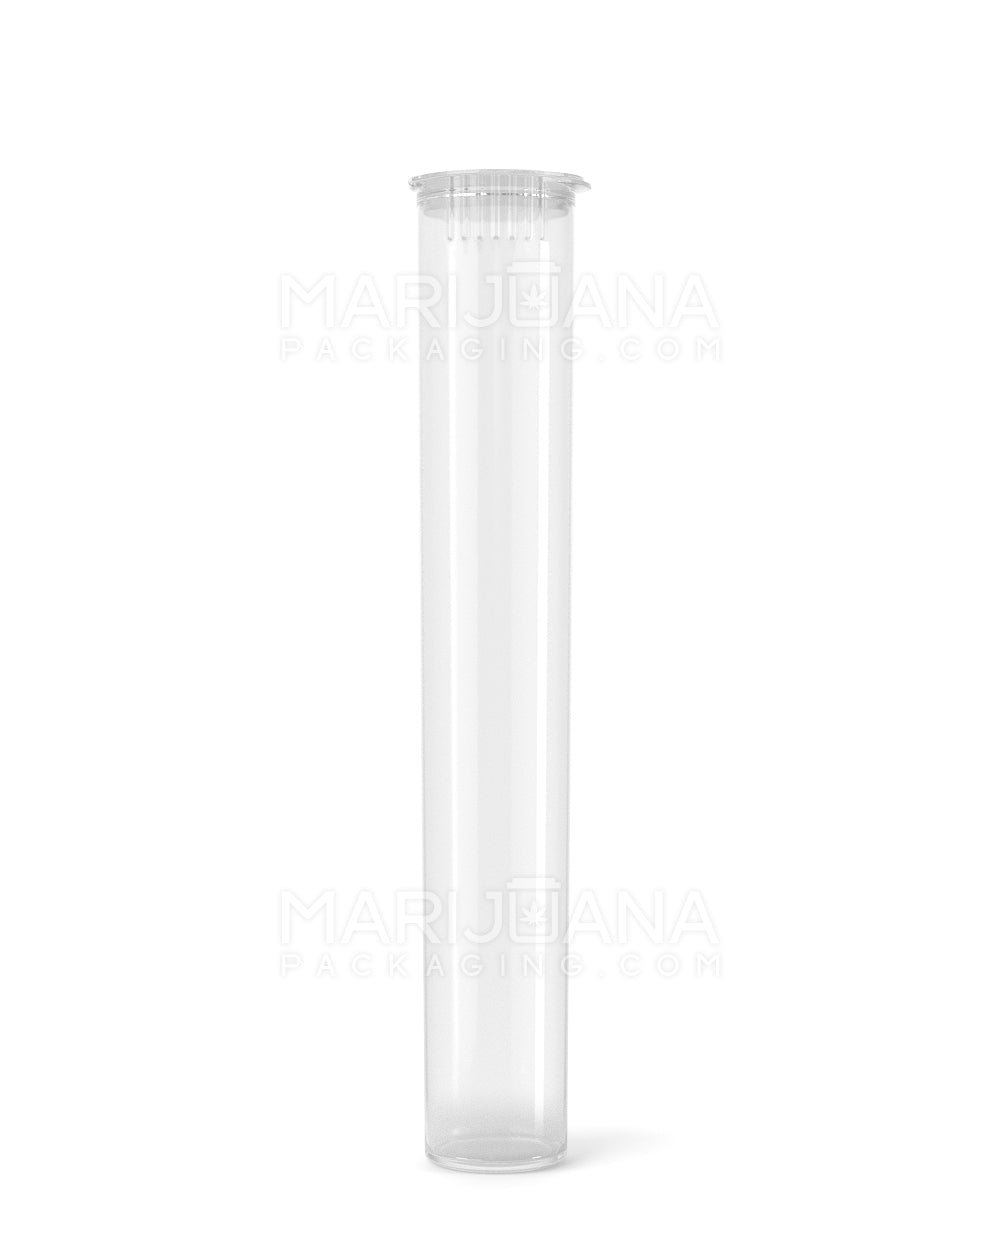 Child Resistant | King Size Pop Top Plastic PCR Pre-Roll Tubes (Open) | 116mm - Clear - 1000 Count - 4